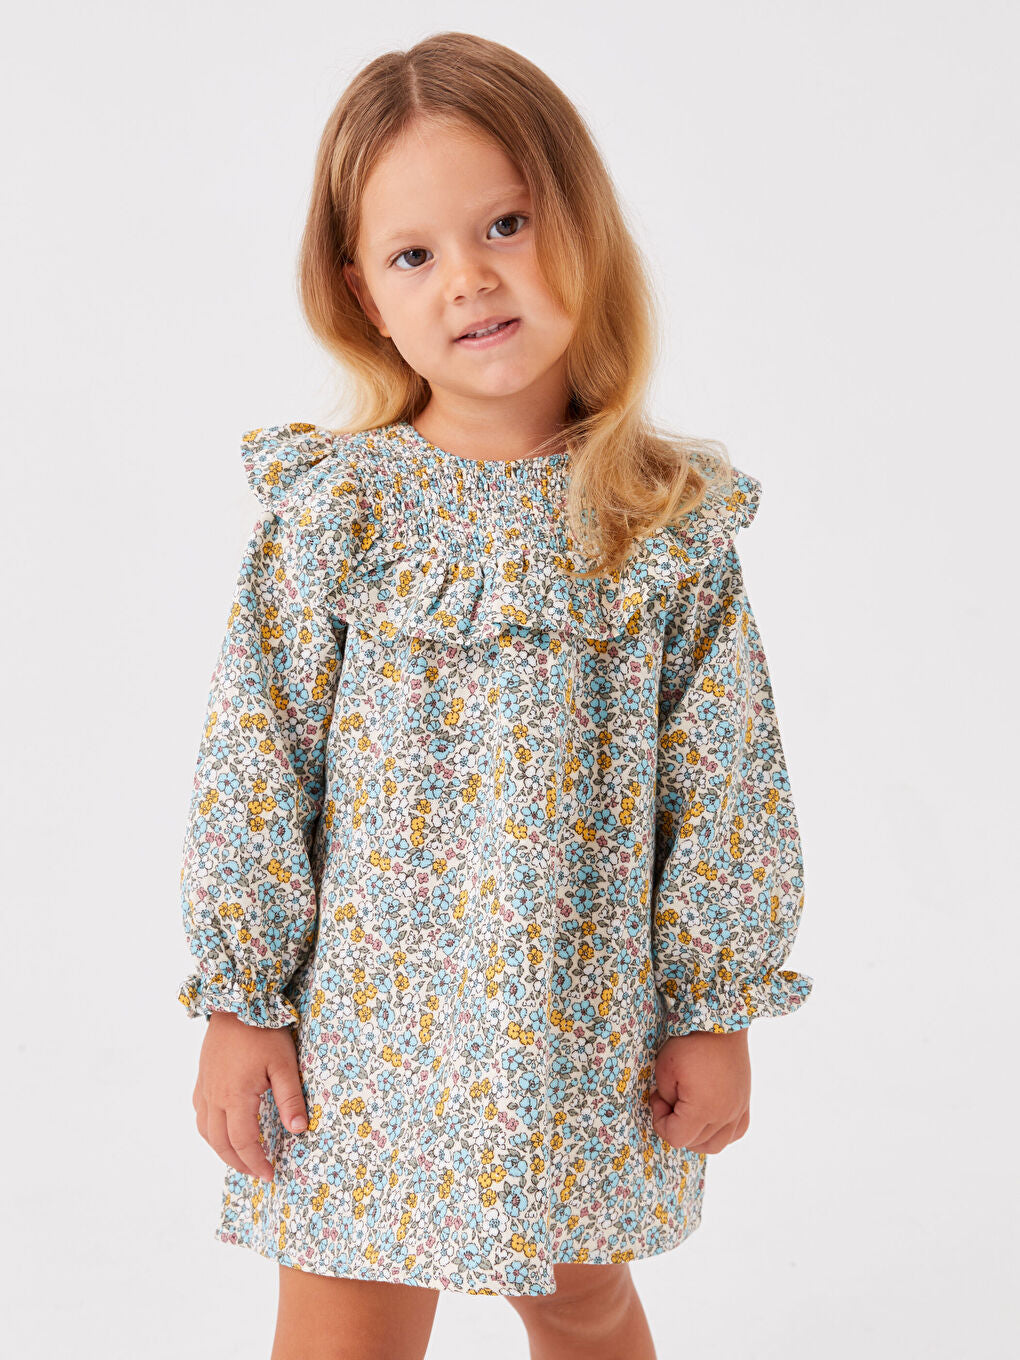 Crew Neck Long Sleeve Floral Patterned Baby Girl Dress